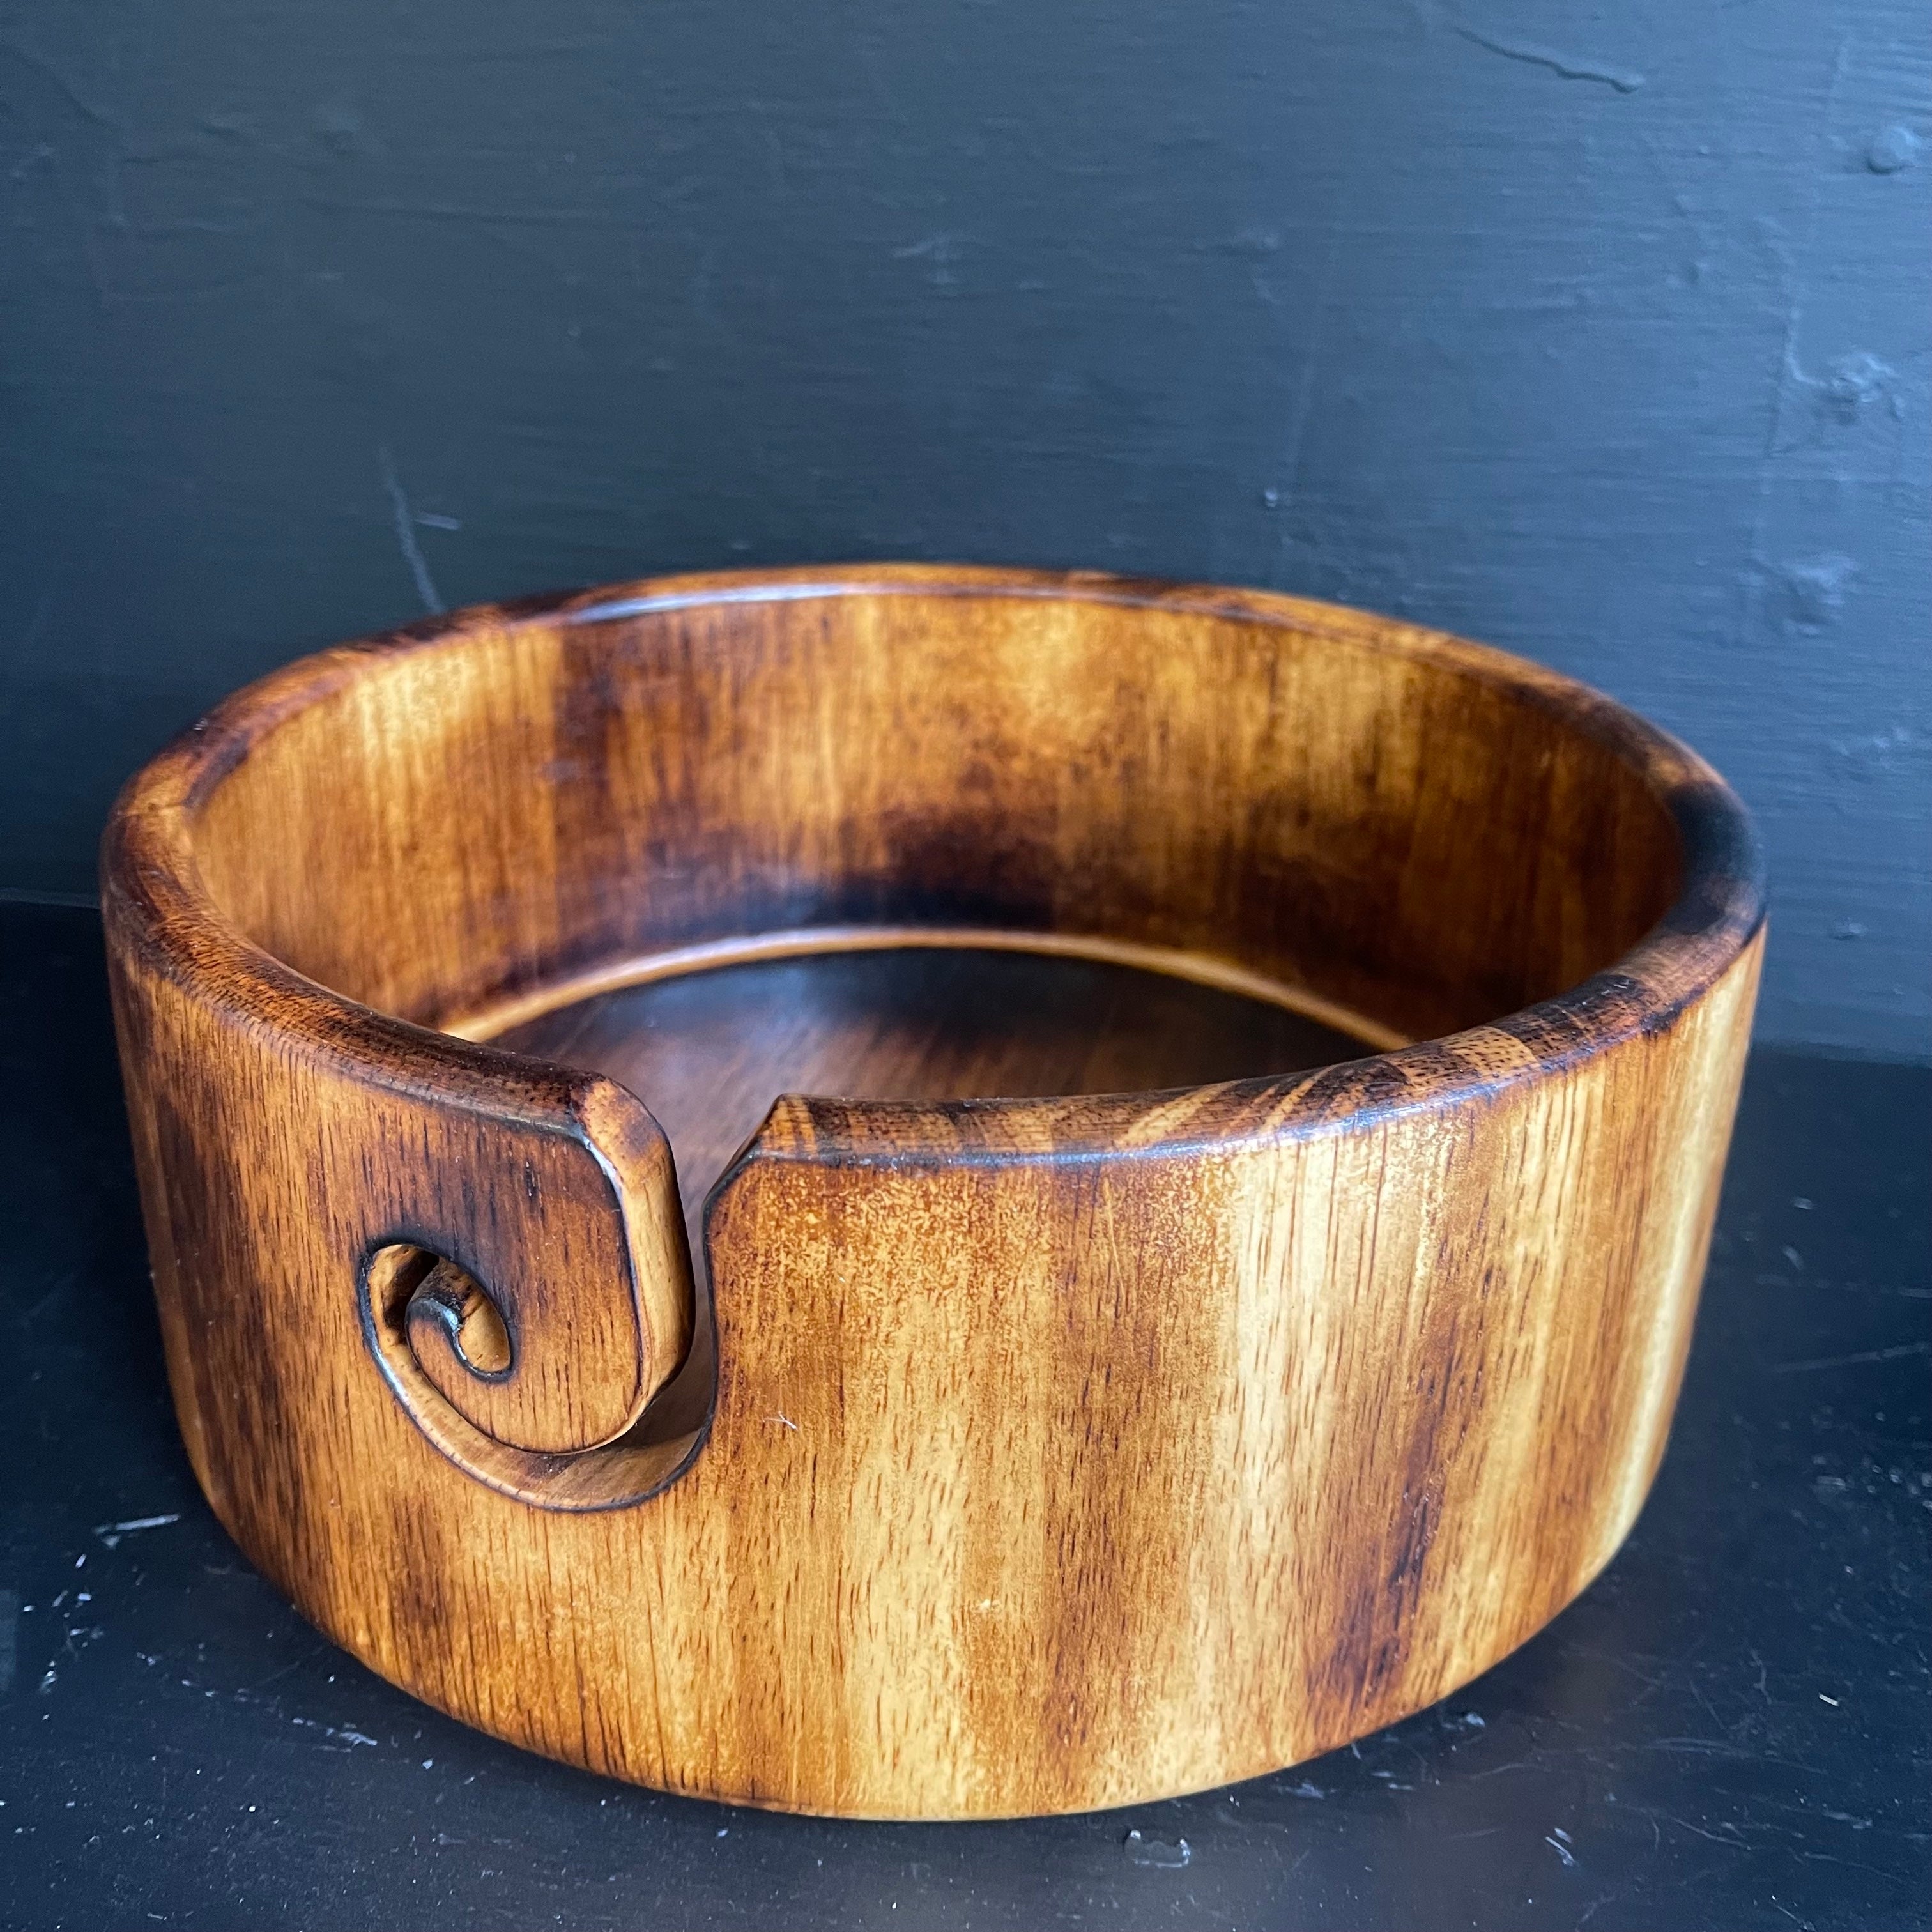 Dean Hood Project/Yarn Container (Burnished Round Bowl)